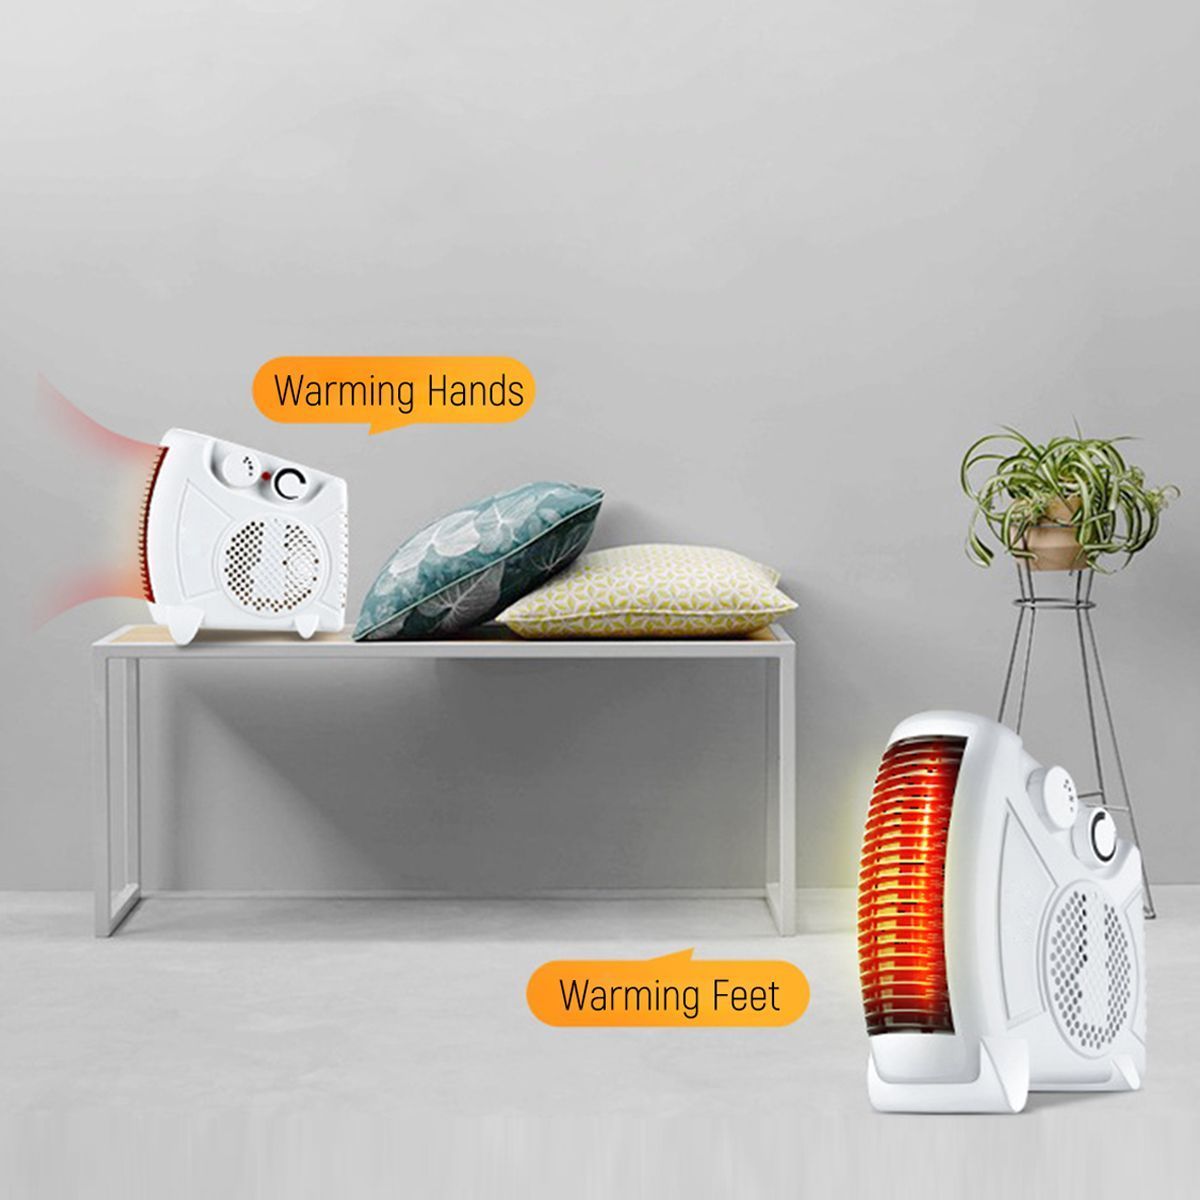 1450W-Portable-Electric-Fan-Silent-Heater-Thermostat-Overheat-Protect-3-1575382